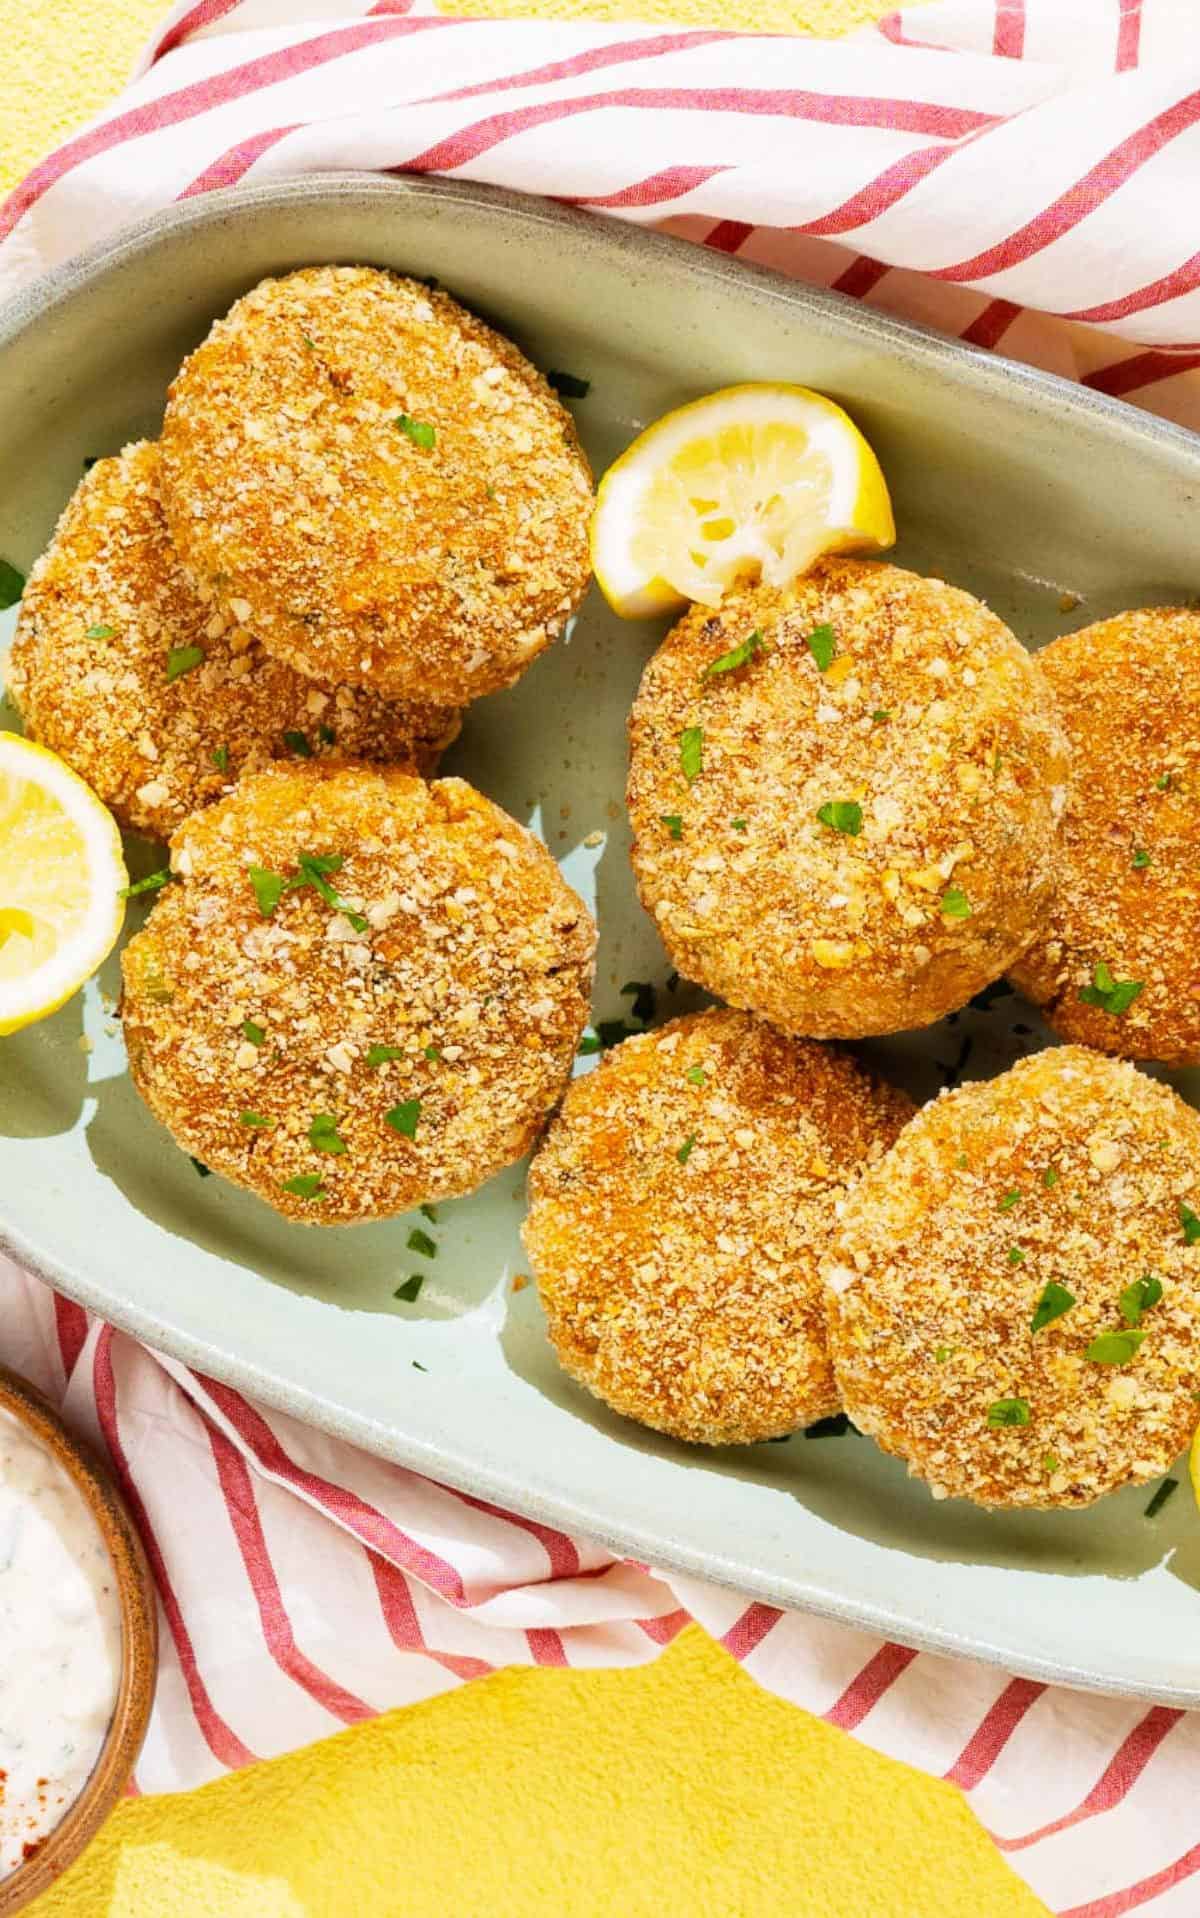 Captain Buddy's Deviled Crab Cakes